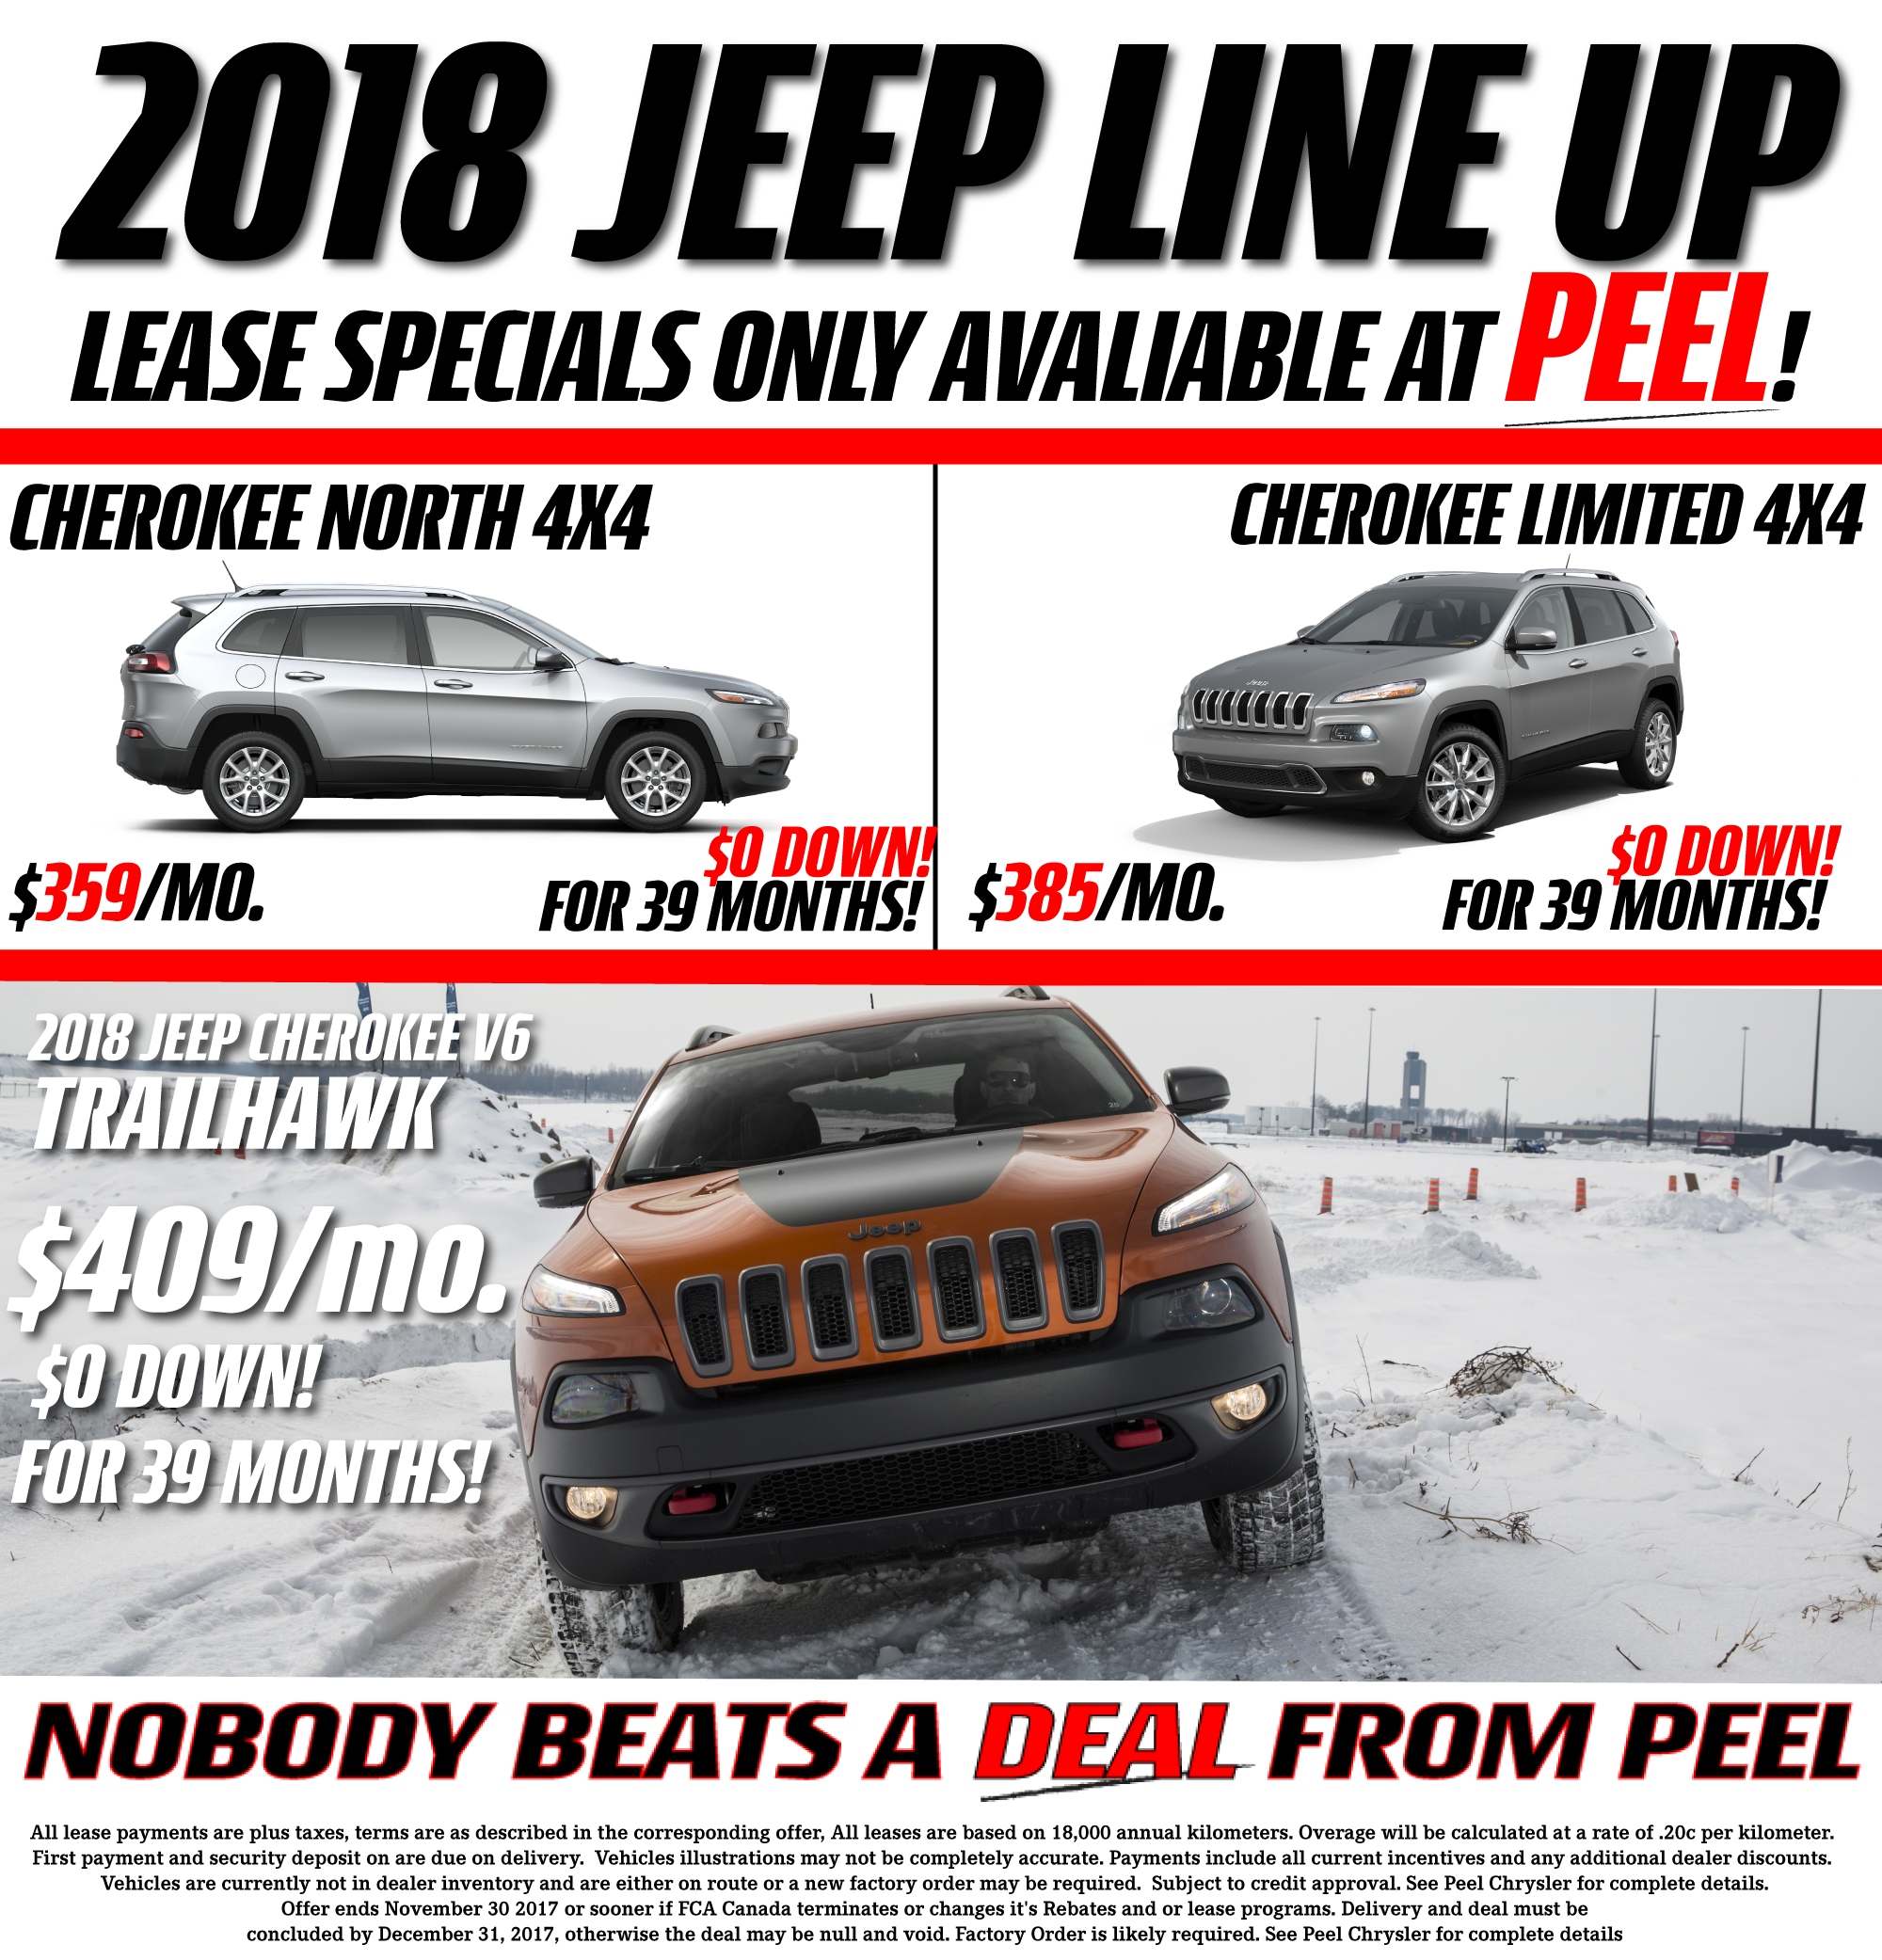 jeep-cherokee-lease-specials-peel-chrysler-fiat